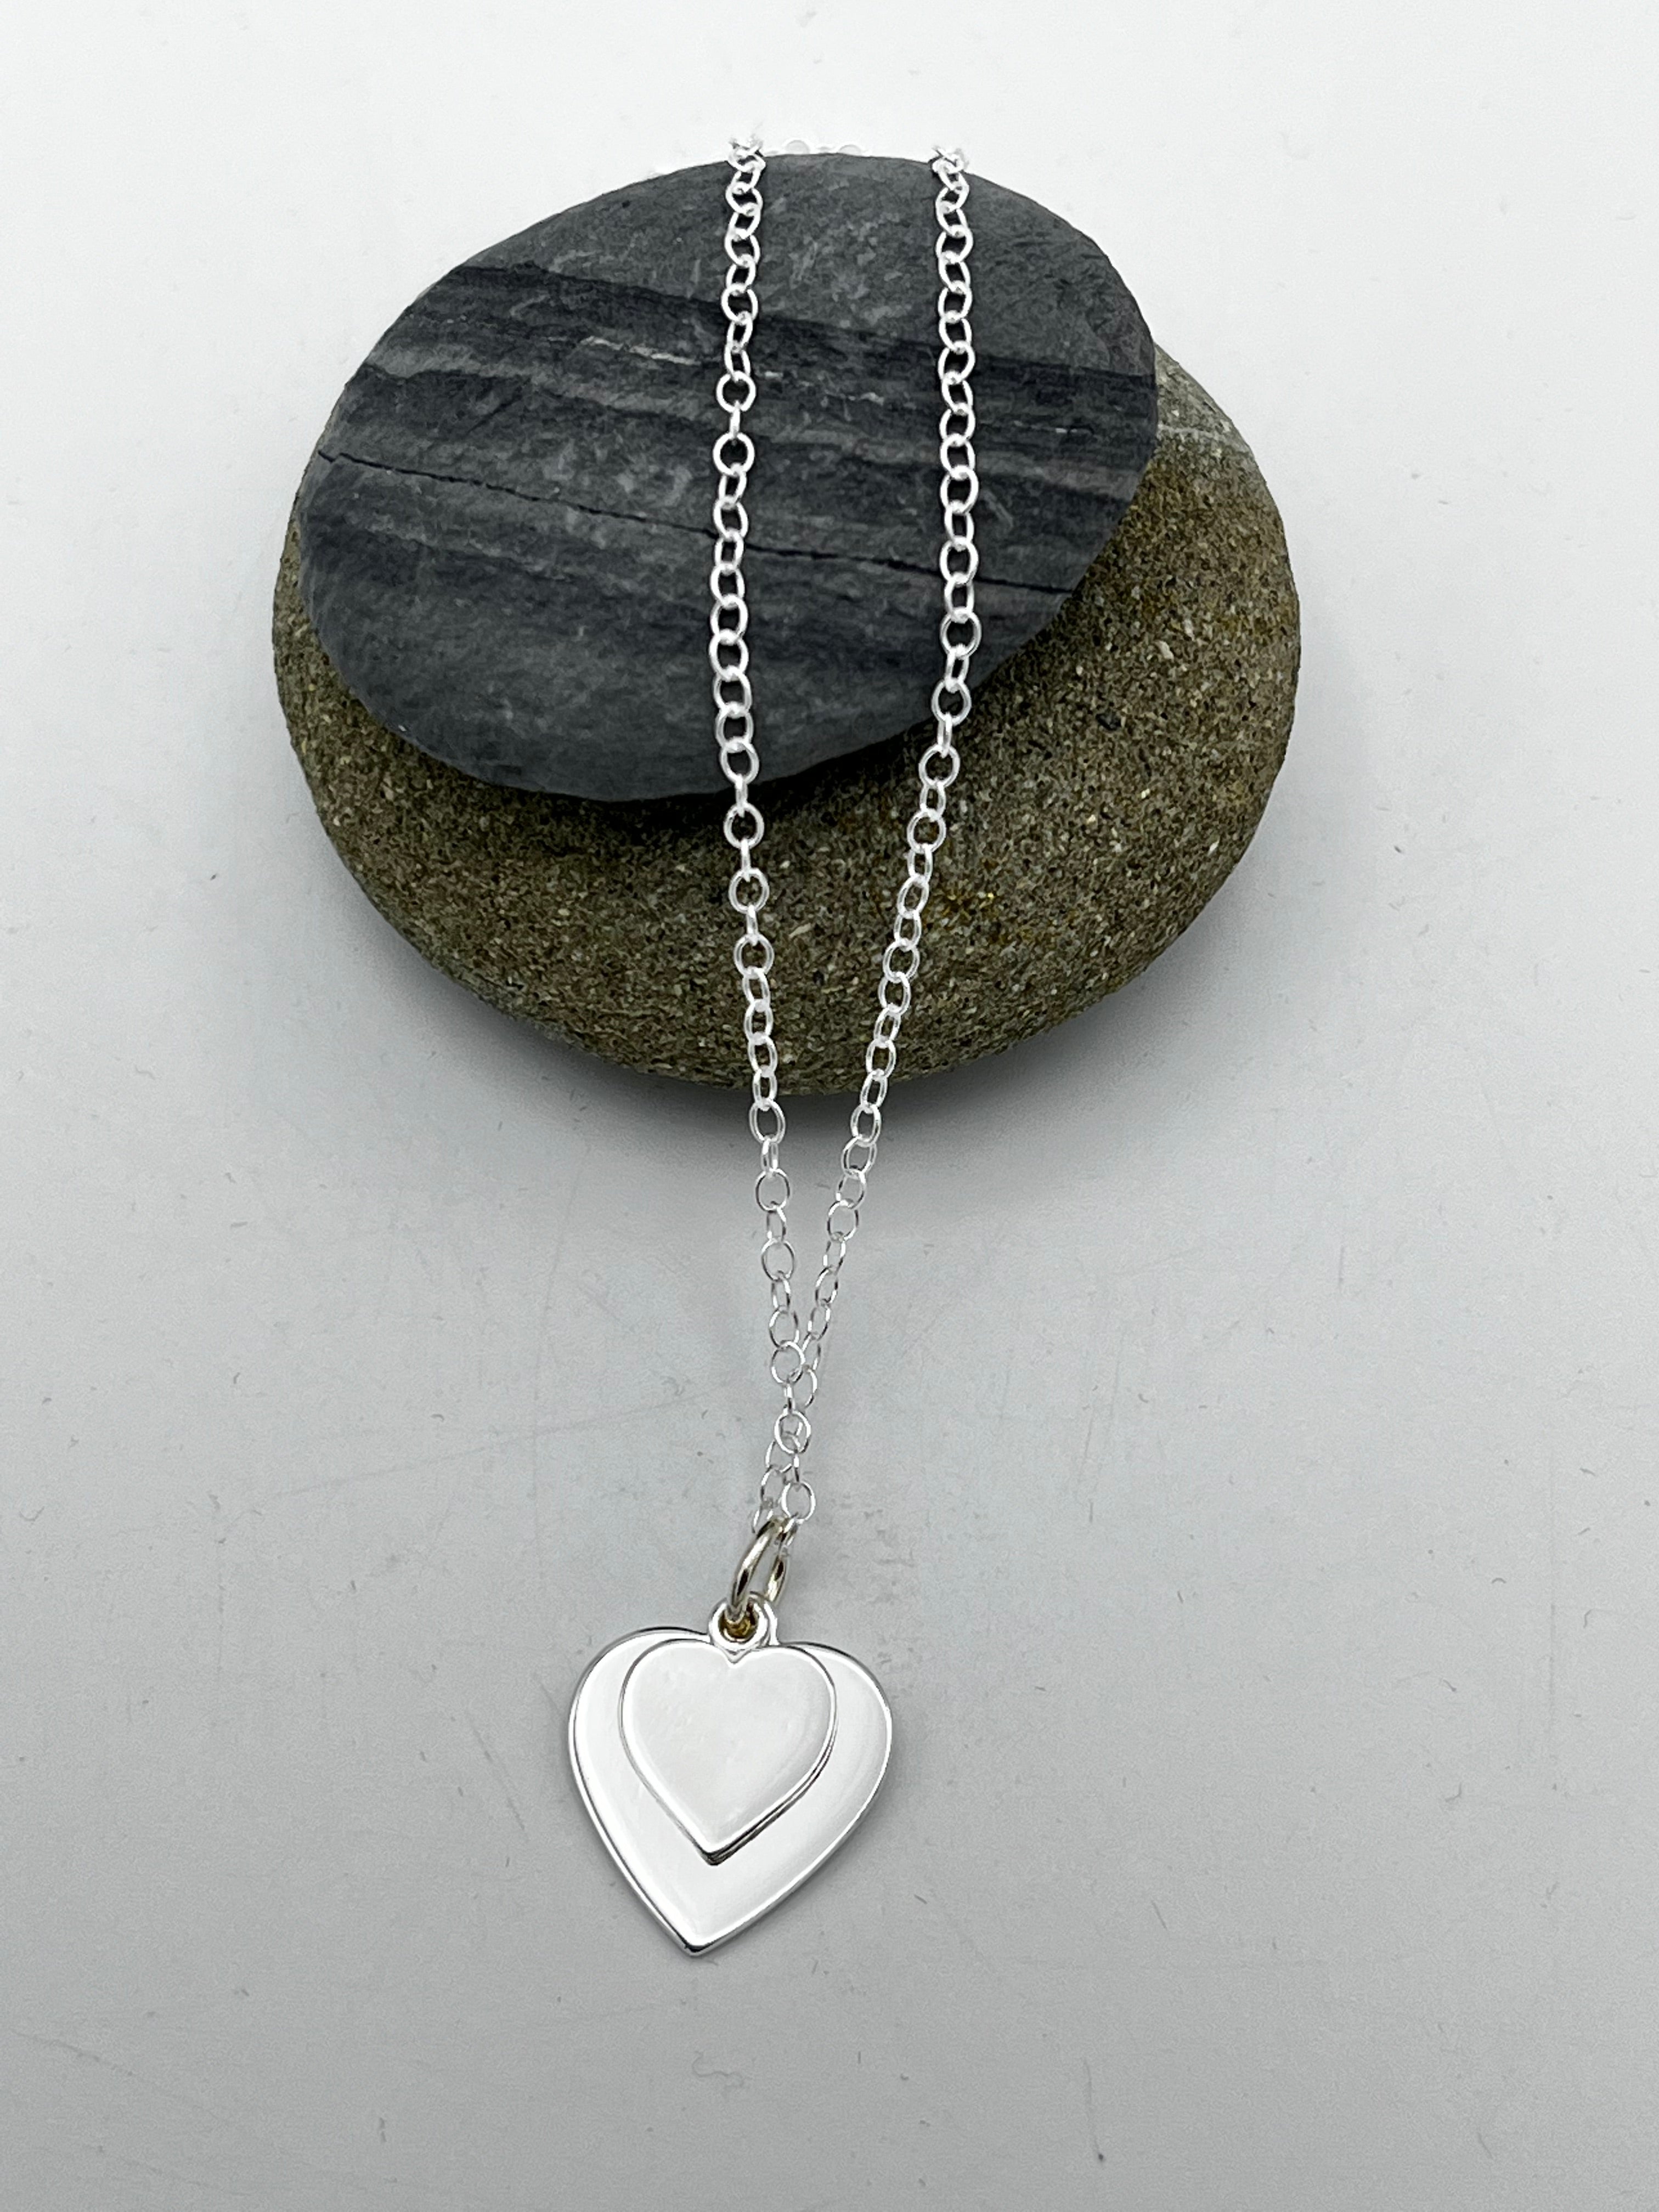 Double heart pendant 15mm & 10mm wide polished finish on 16" trace chain